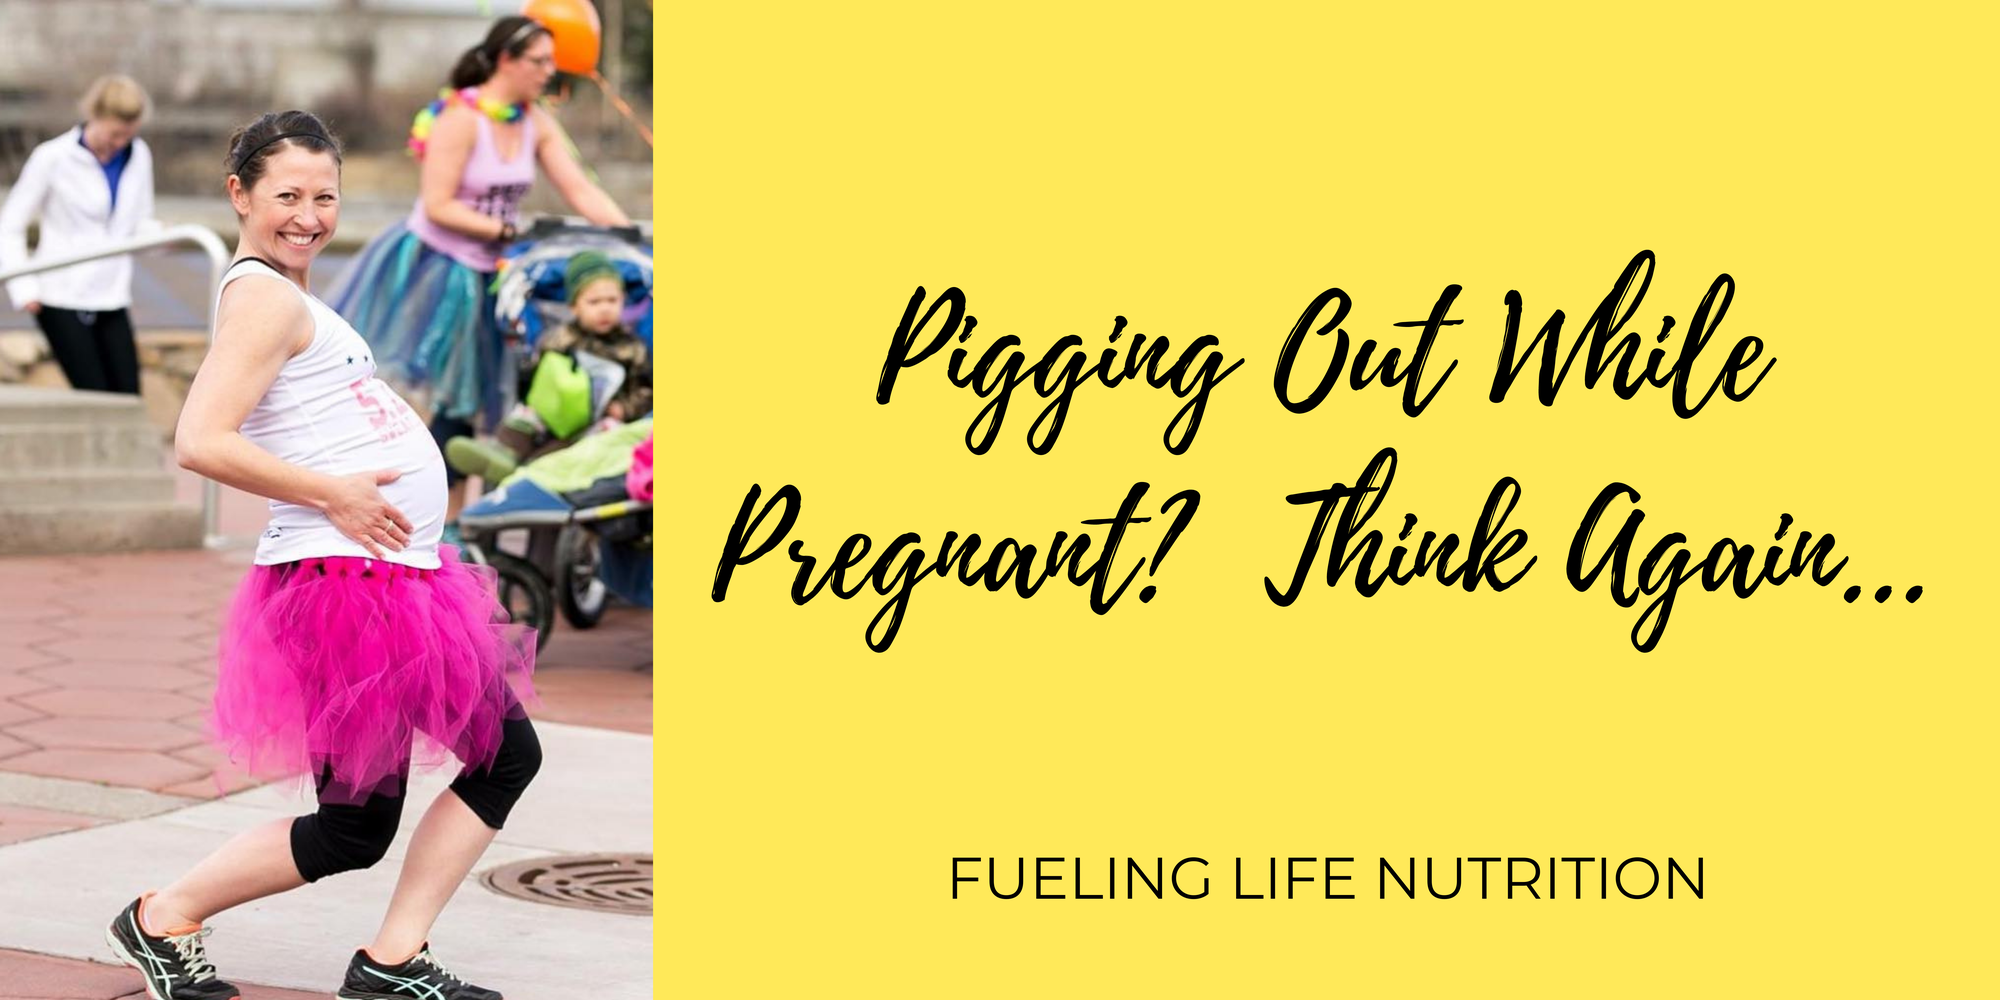 Pigging Out While Pregnant?